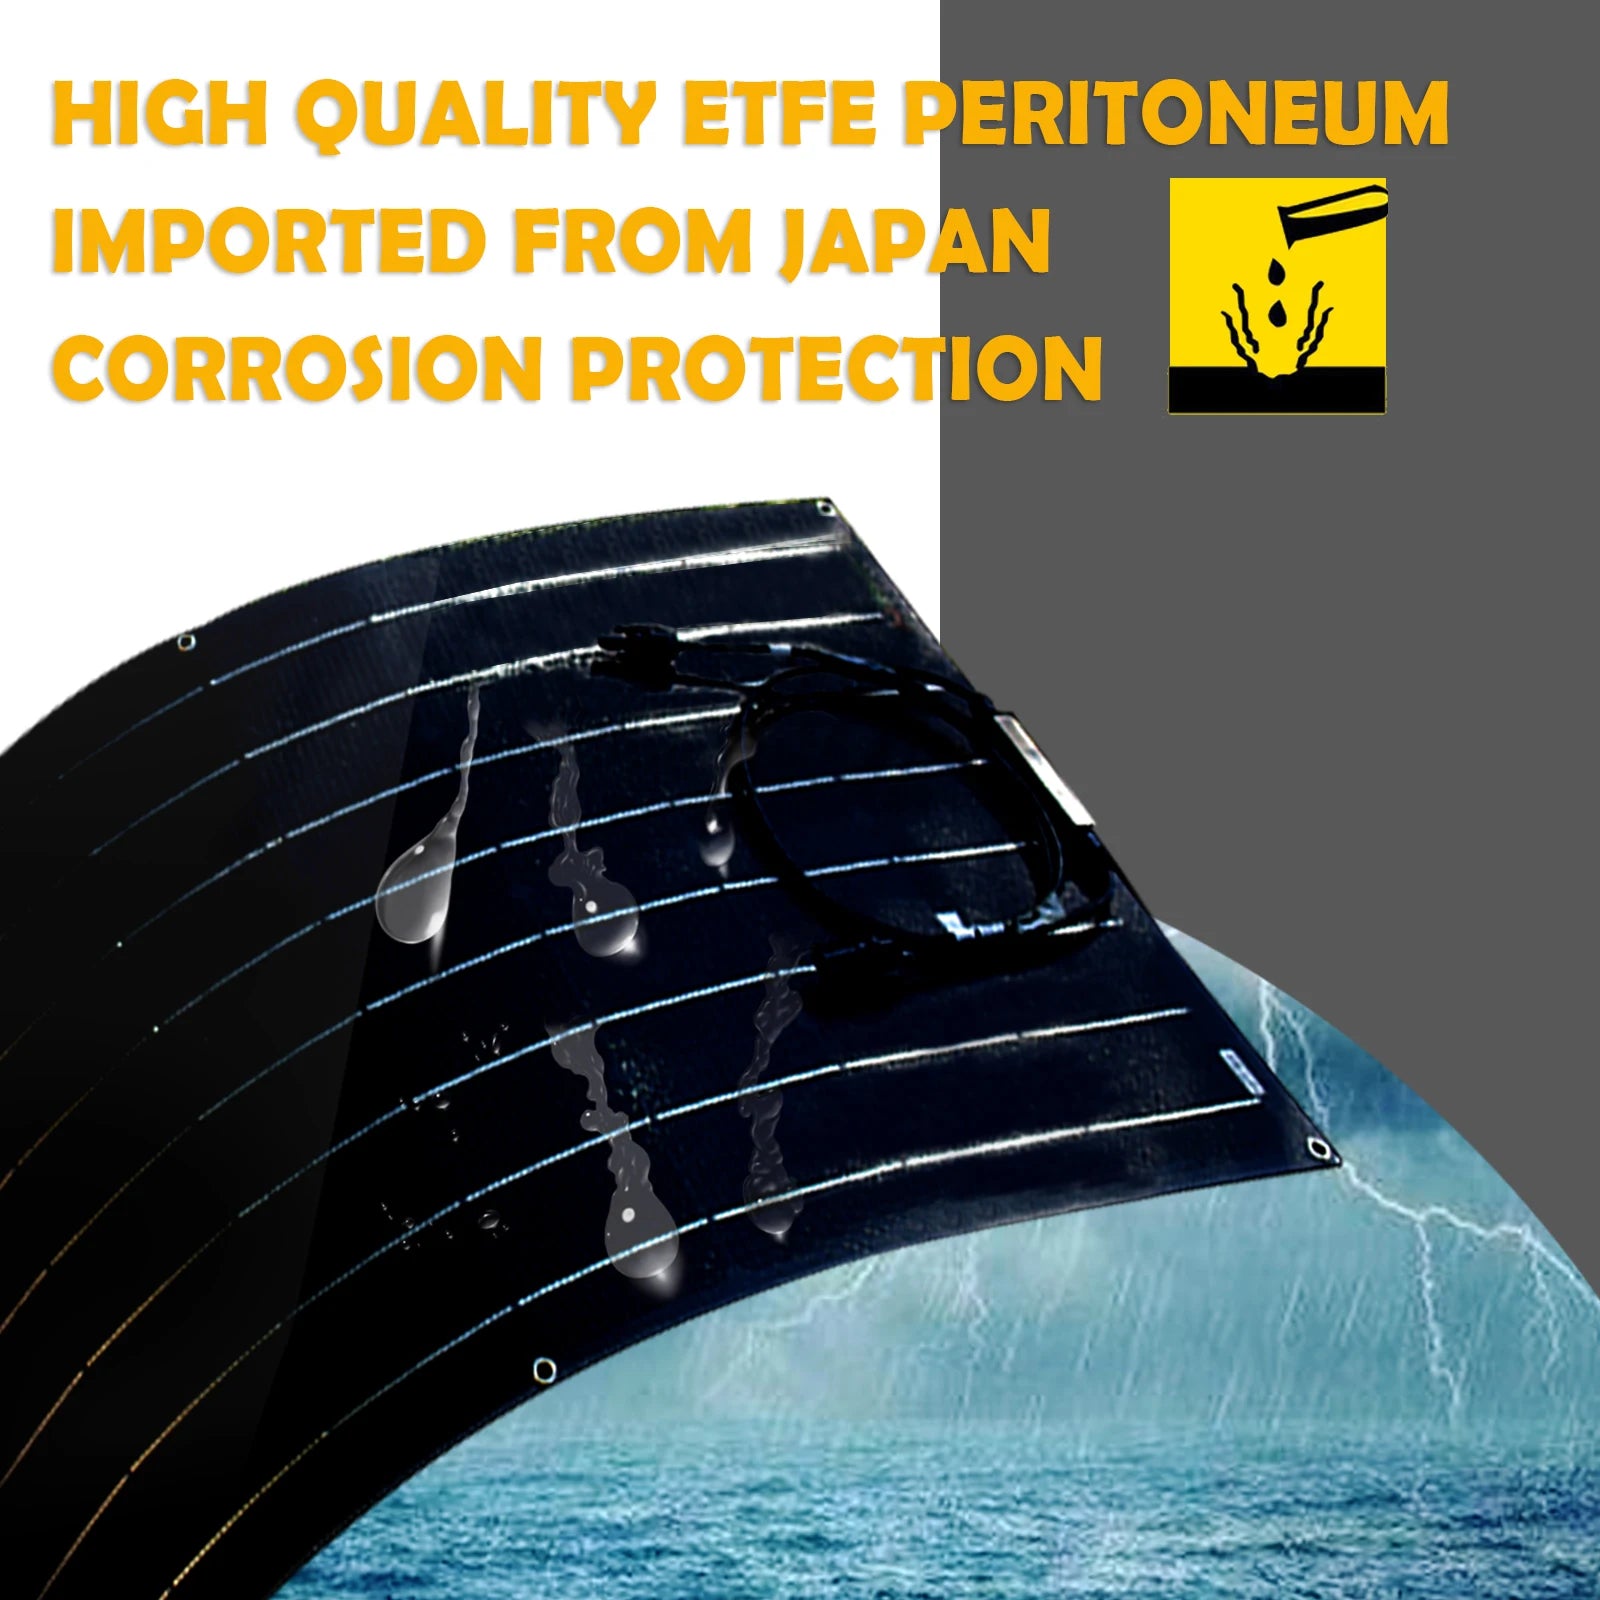 High-quality ETFE film imported from Japan provides corrosion protection for our flexible solar panels.